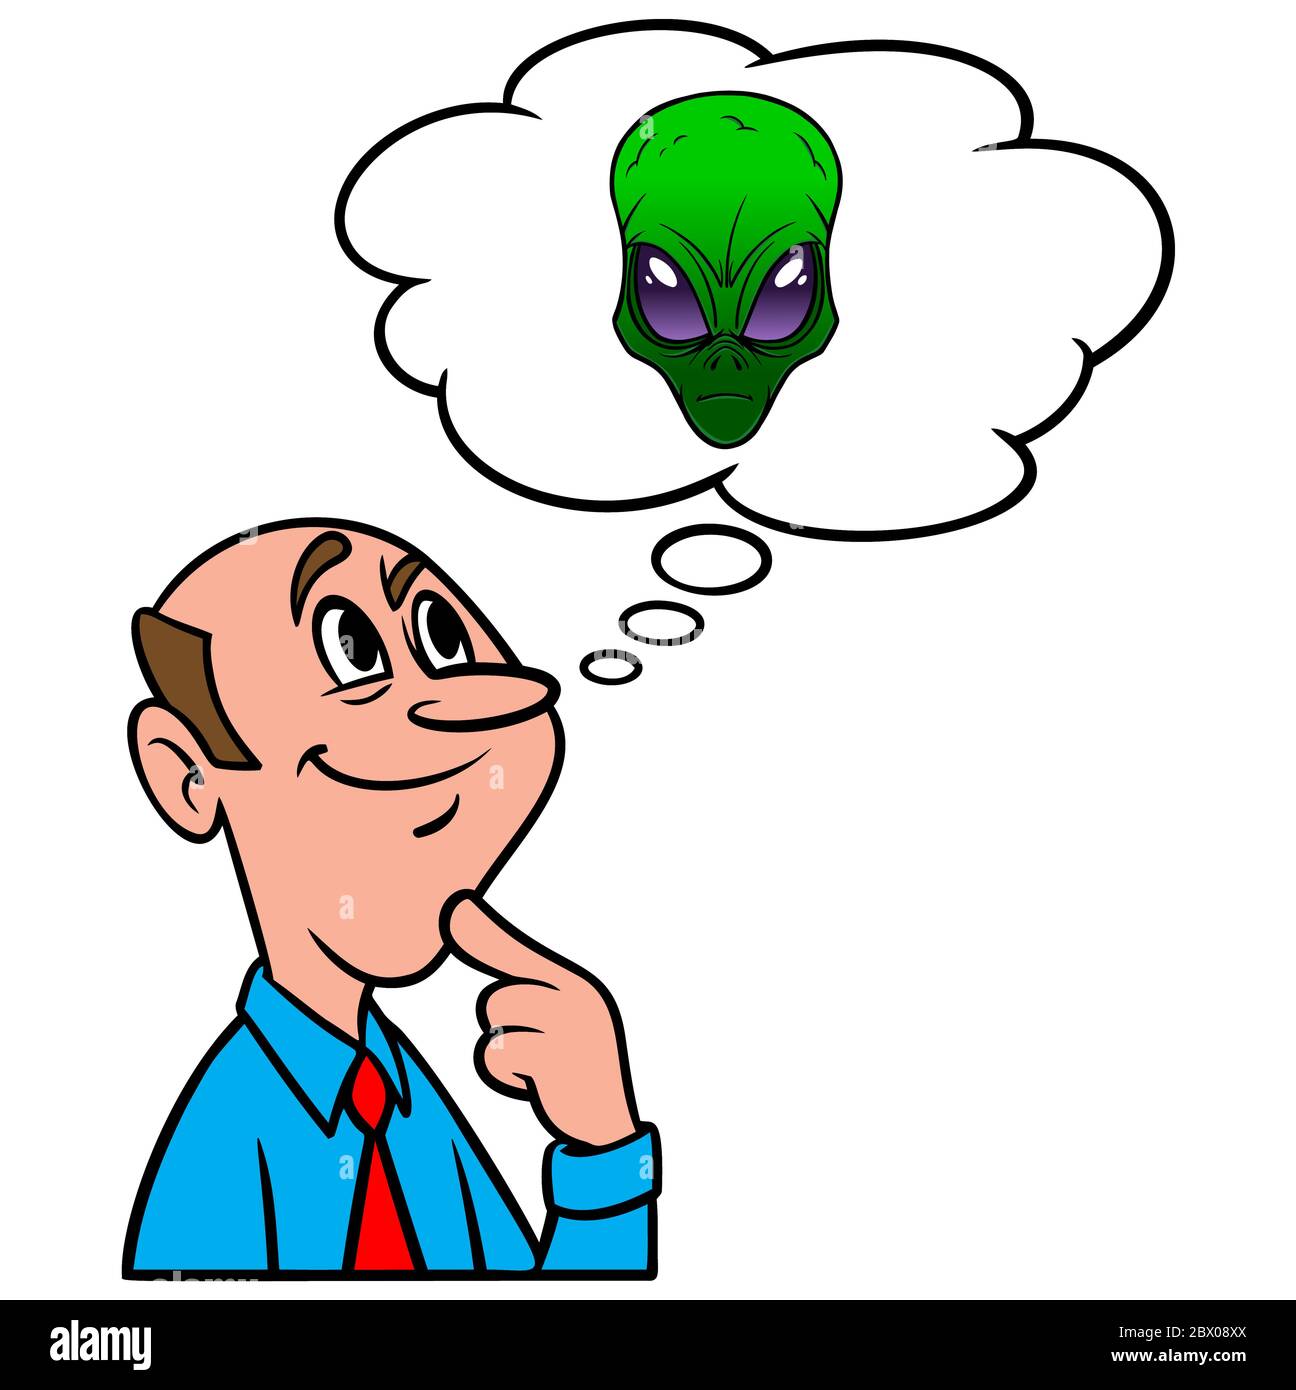 Thinking About Aliens- A Person Thinking About Aliens. Stock Vector